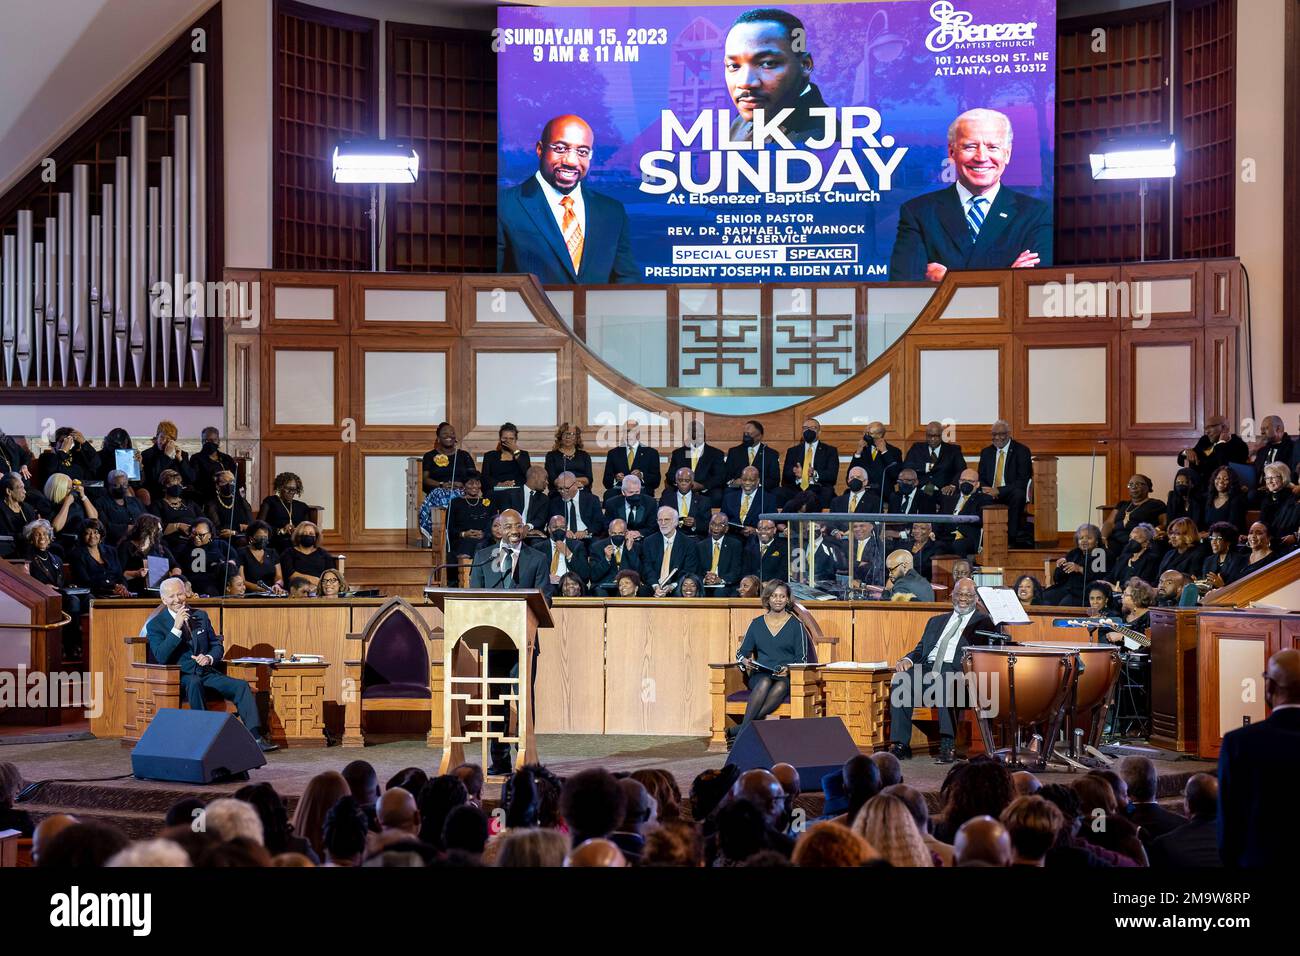 Atlanta, United States of America. 15 January, 2023. U.S President Joe Biden, listens to remarks by the Reverend, Sen. Raphael Warnock during a celebration of Martin Luther King Jr. Day at Ebenezer Baptist Church, January 15, 2023 in Atlanta, Georgia. Biden is the first sitting president to delivered a sermon at the church where Martin Luther King Jr. was a pastor. Credit: Adam Schultz/White House Photo/Alamy Live News Stock Photo